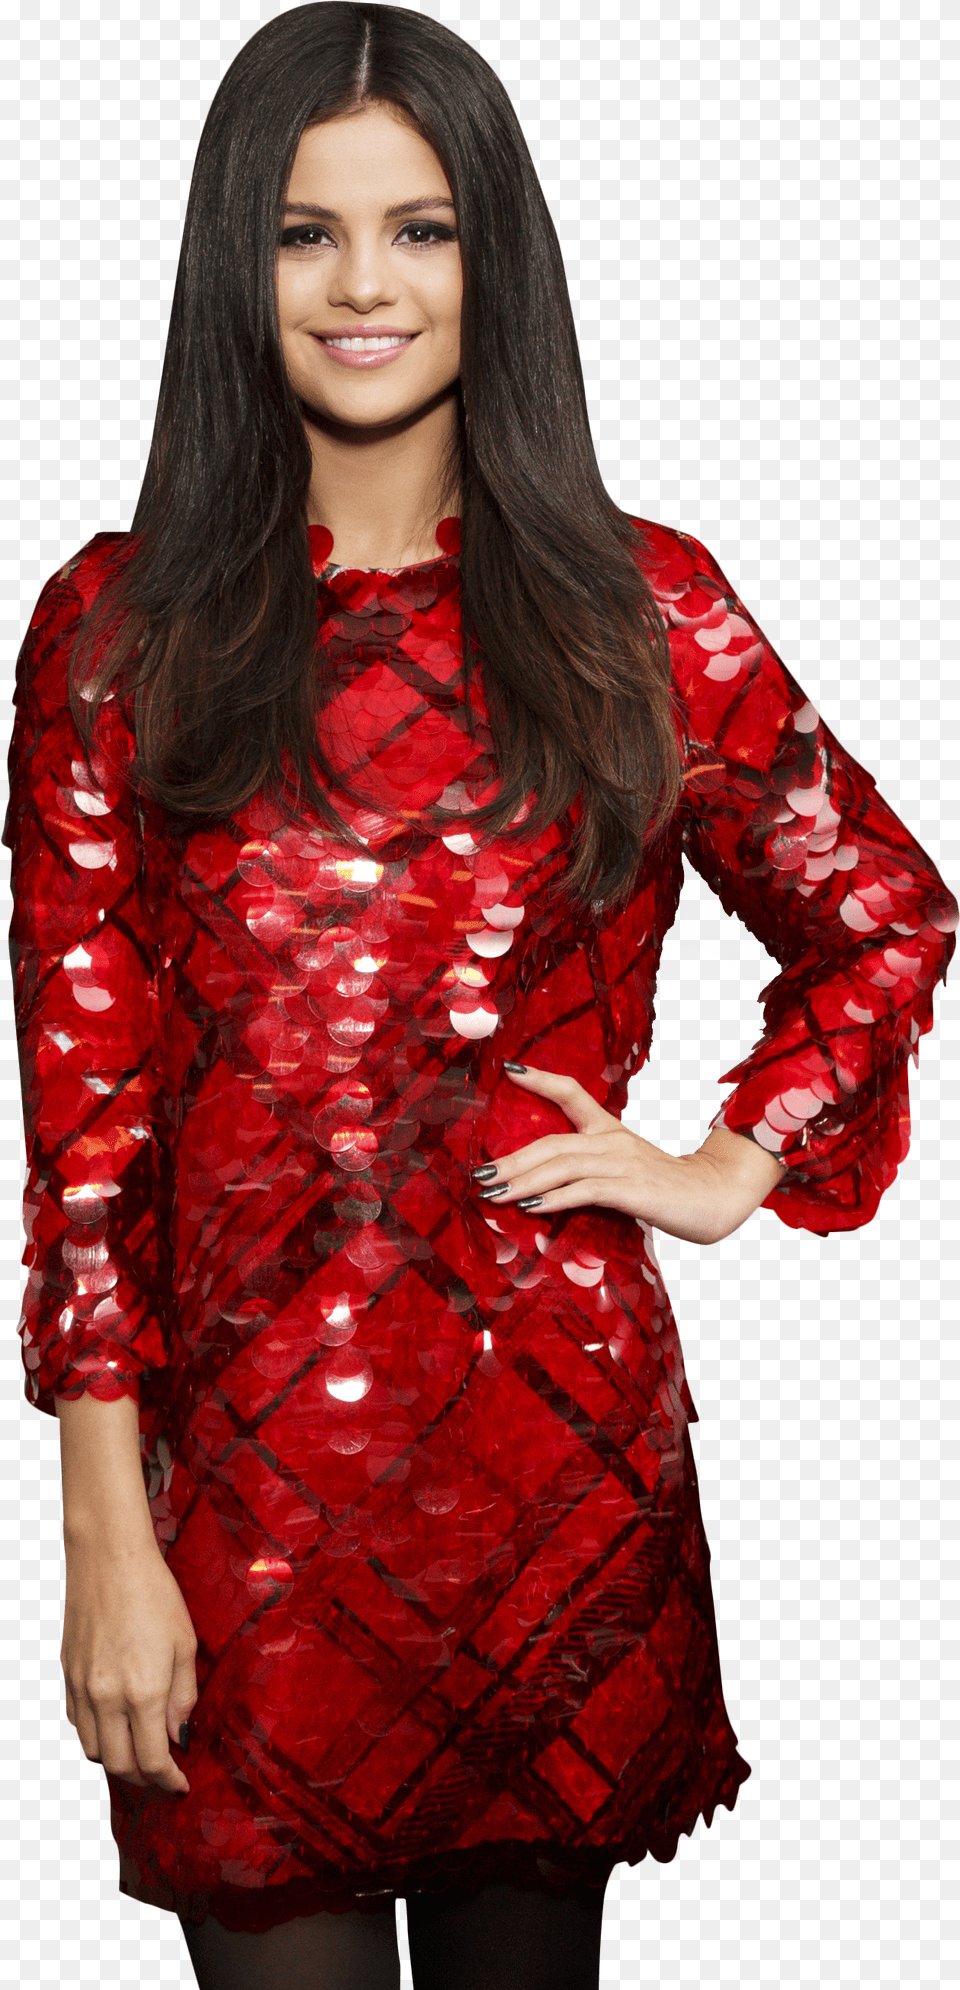 Selena Gomez In Red Dress And Black Pantyhose Selena Gomez Free Transparent Png